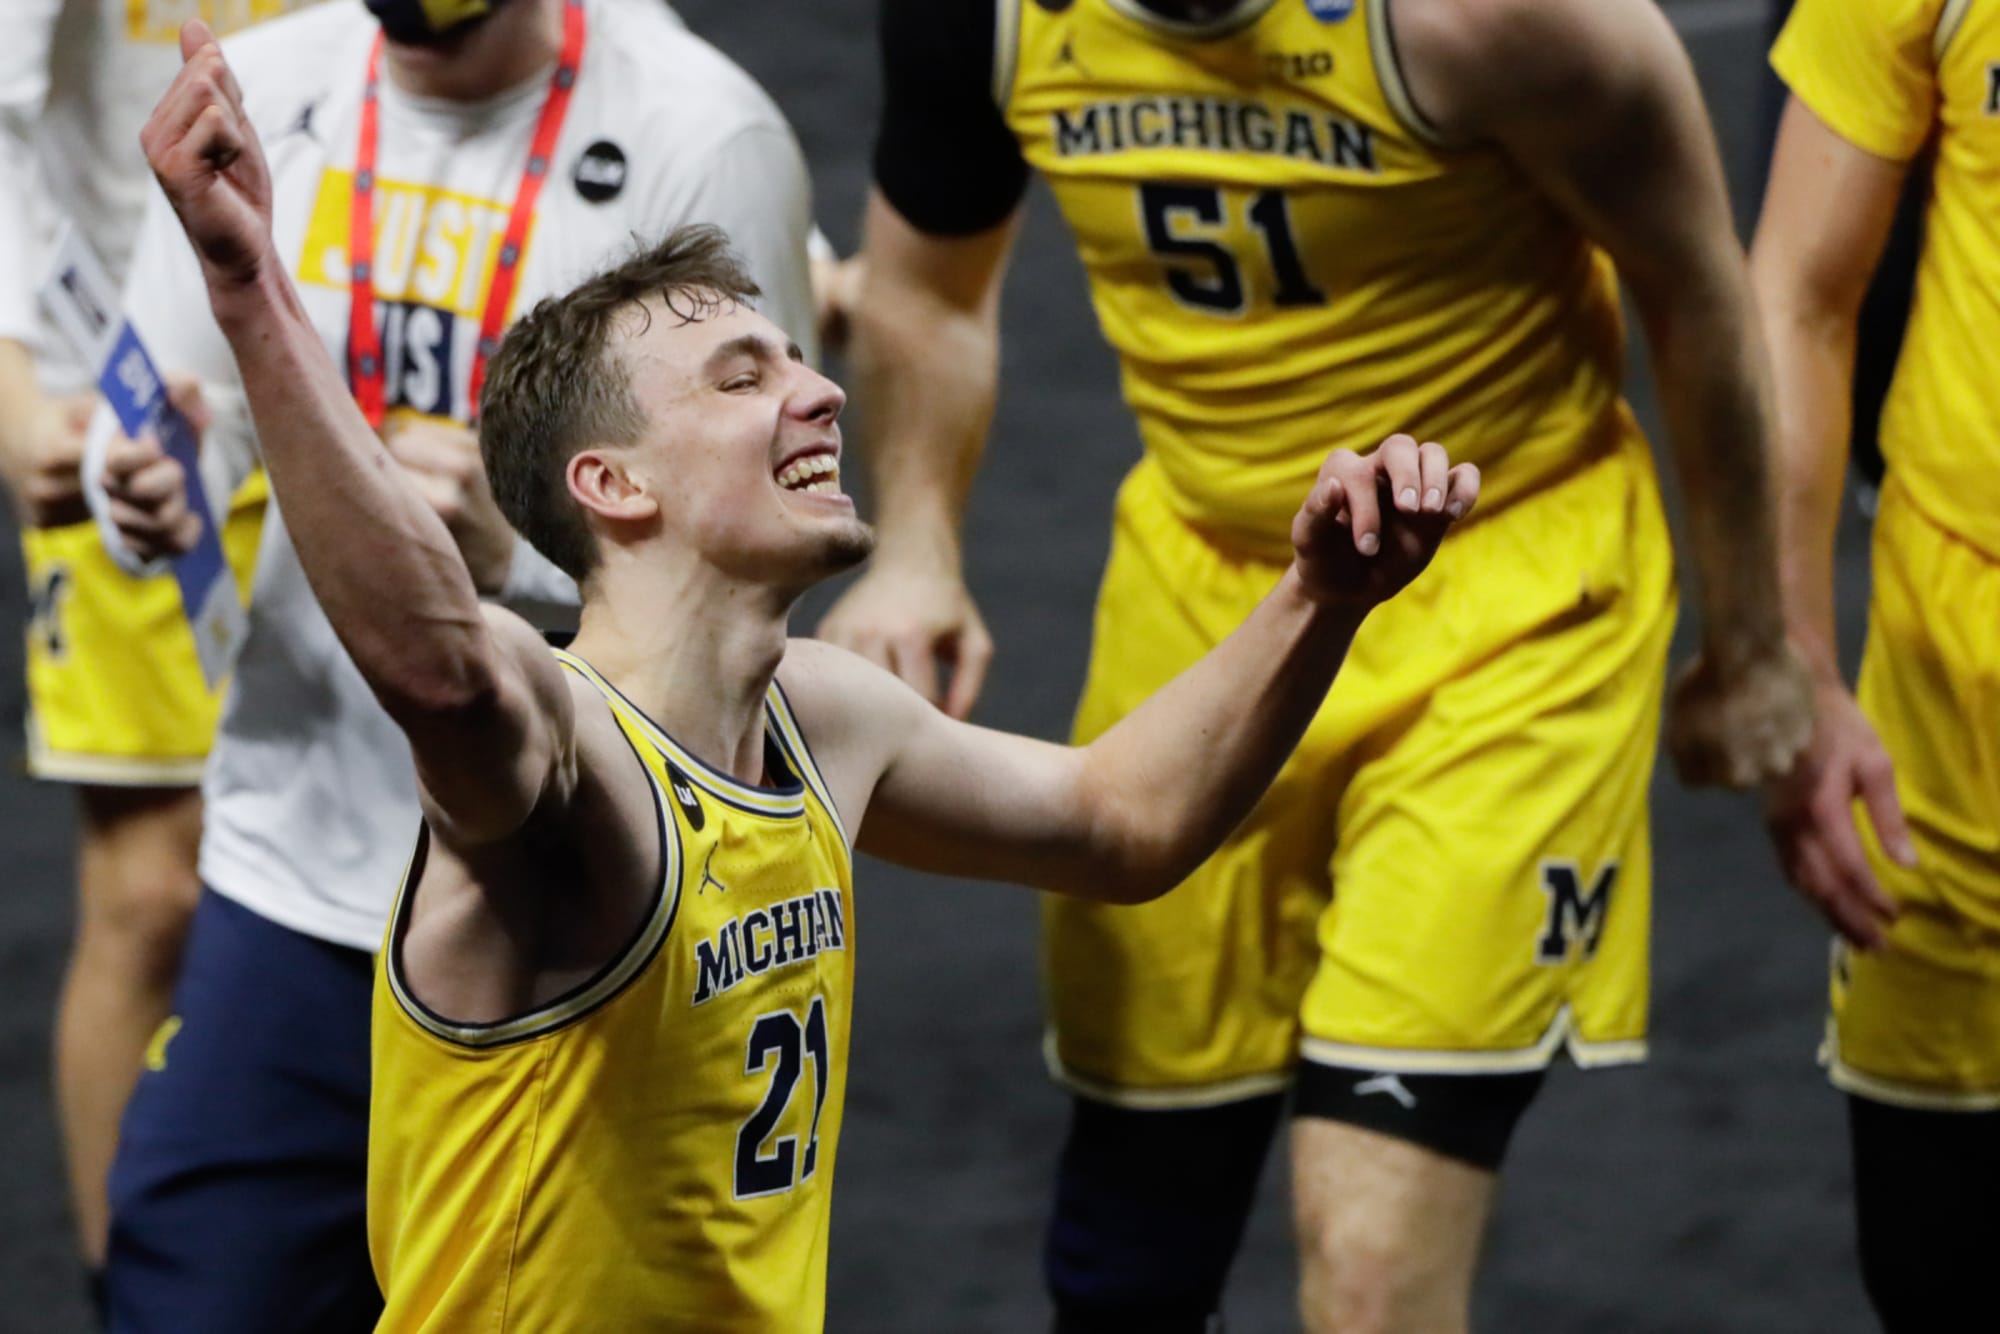 A Letter to My Michigan Family by Franz Wagner